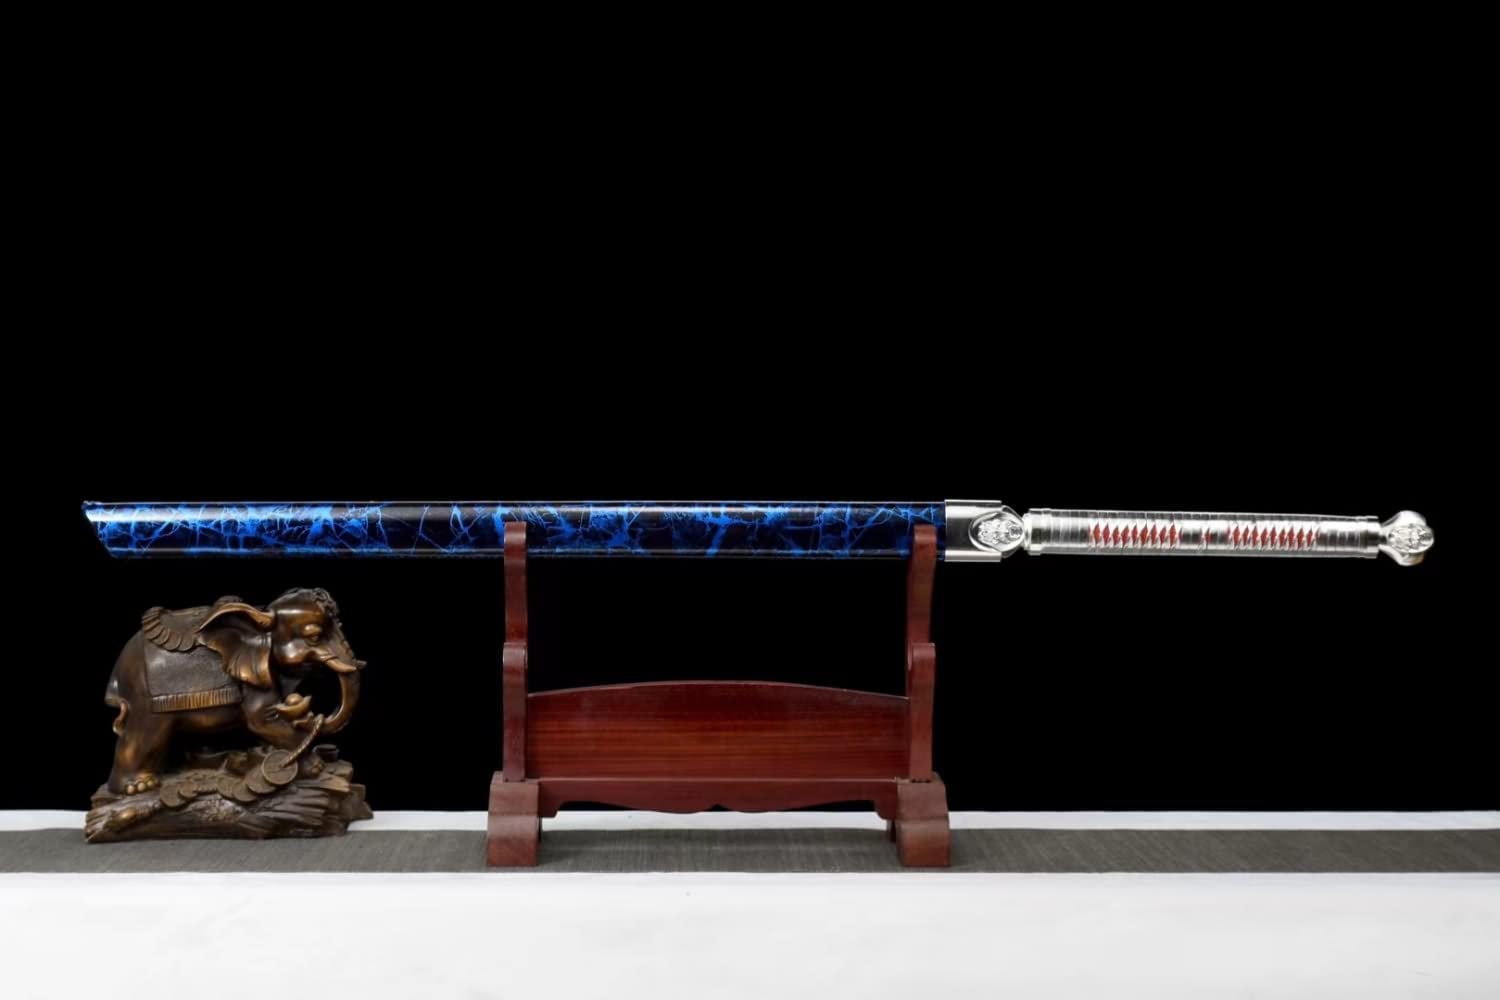 Tang Sword with High Carbon Steel Blue Blade and Dragon & Phoenix Engravings on Each Side